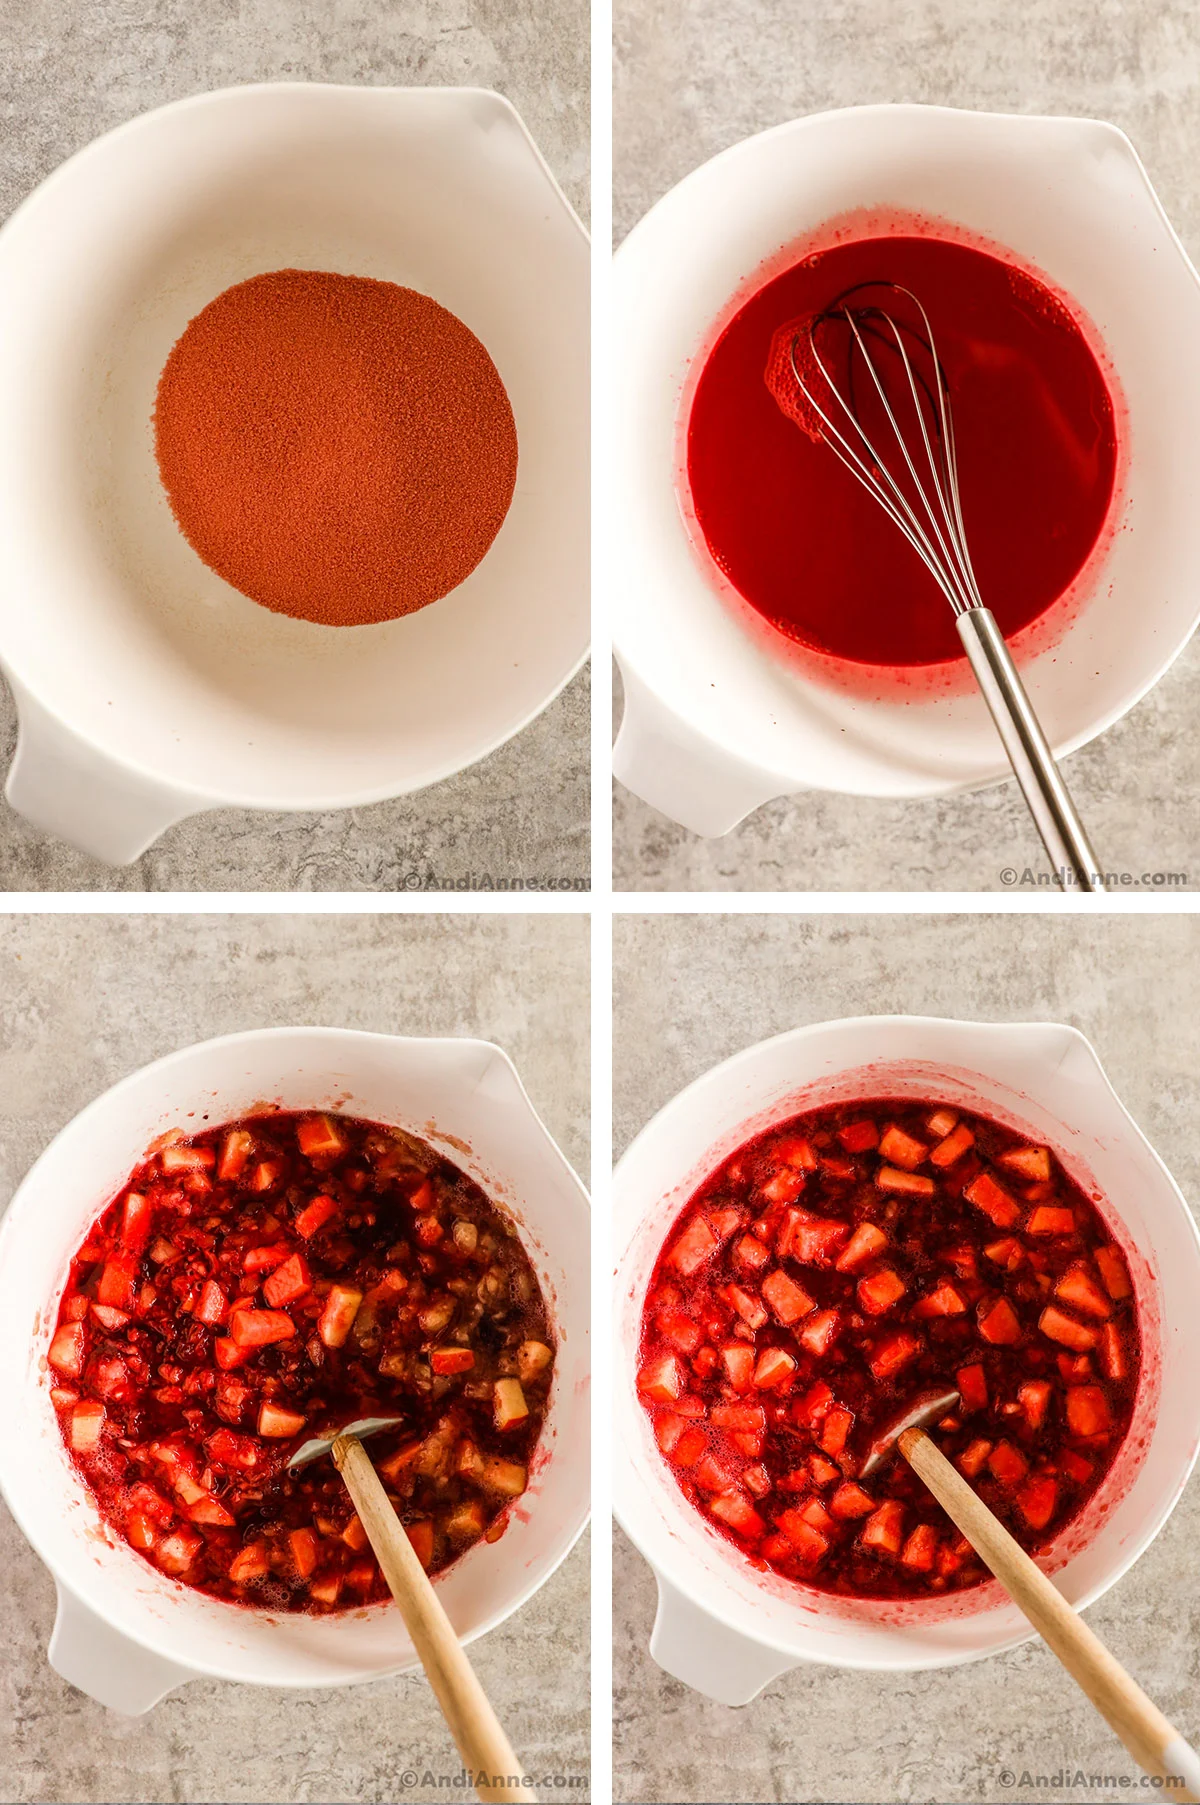 Four images of bowls, first is jello powder, second is red liquid in bowl with a whisk, fourth is chopped apples, pineapple and cranberry sauce. Fourth is cranberry jello salad with chopped apple pieces.